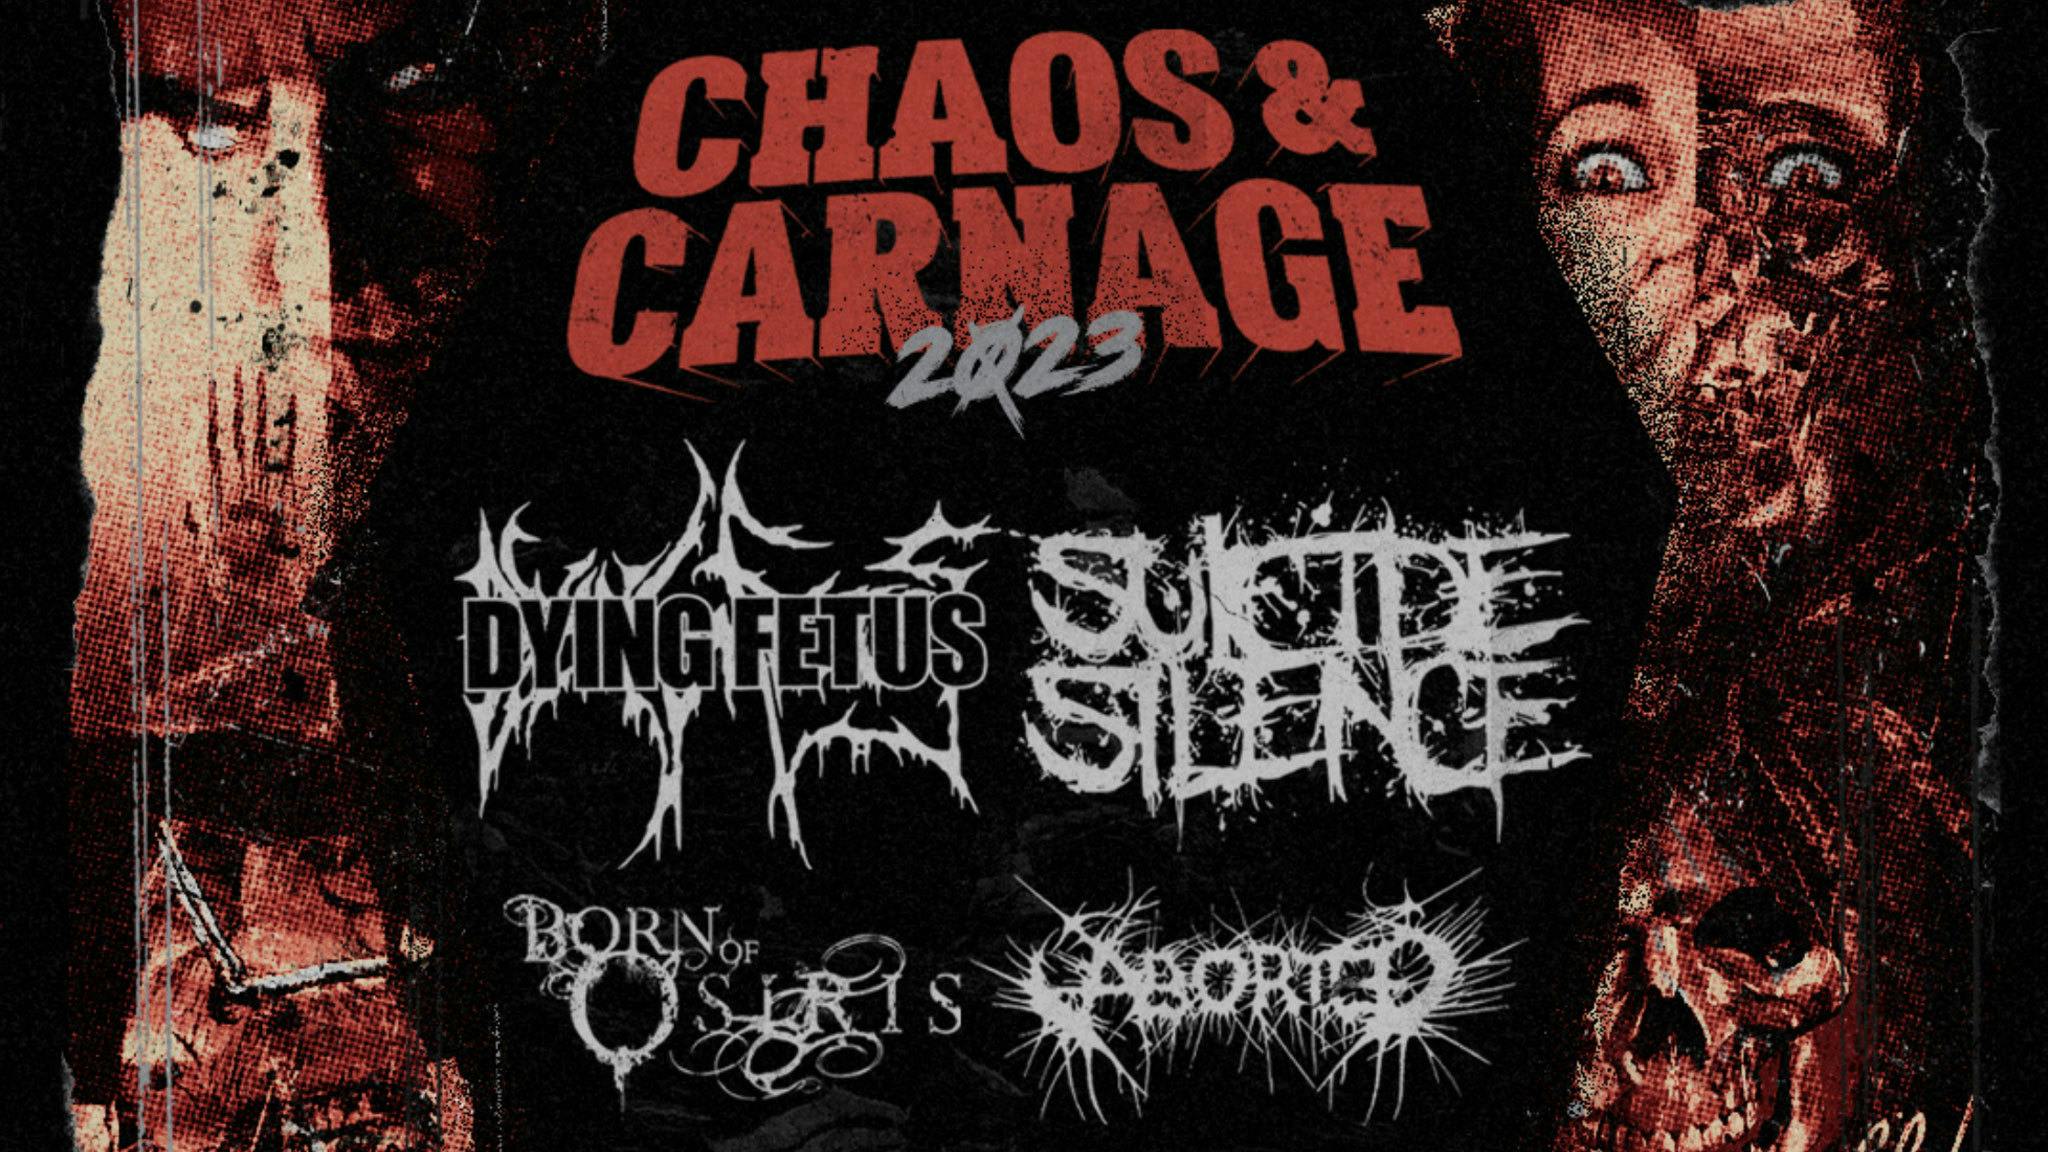 Dying Fetus and Suicide Silence announce Chaos & Carnage co-headline tour